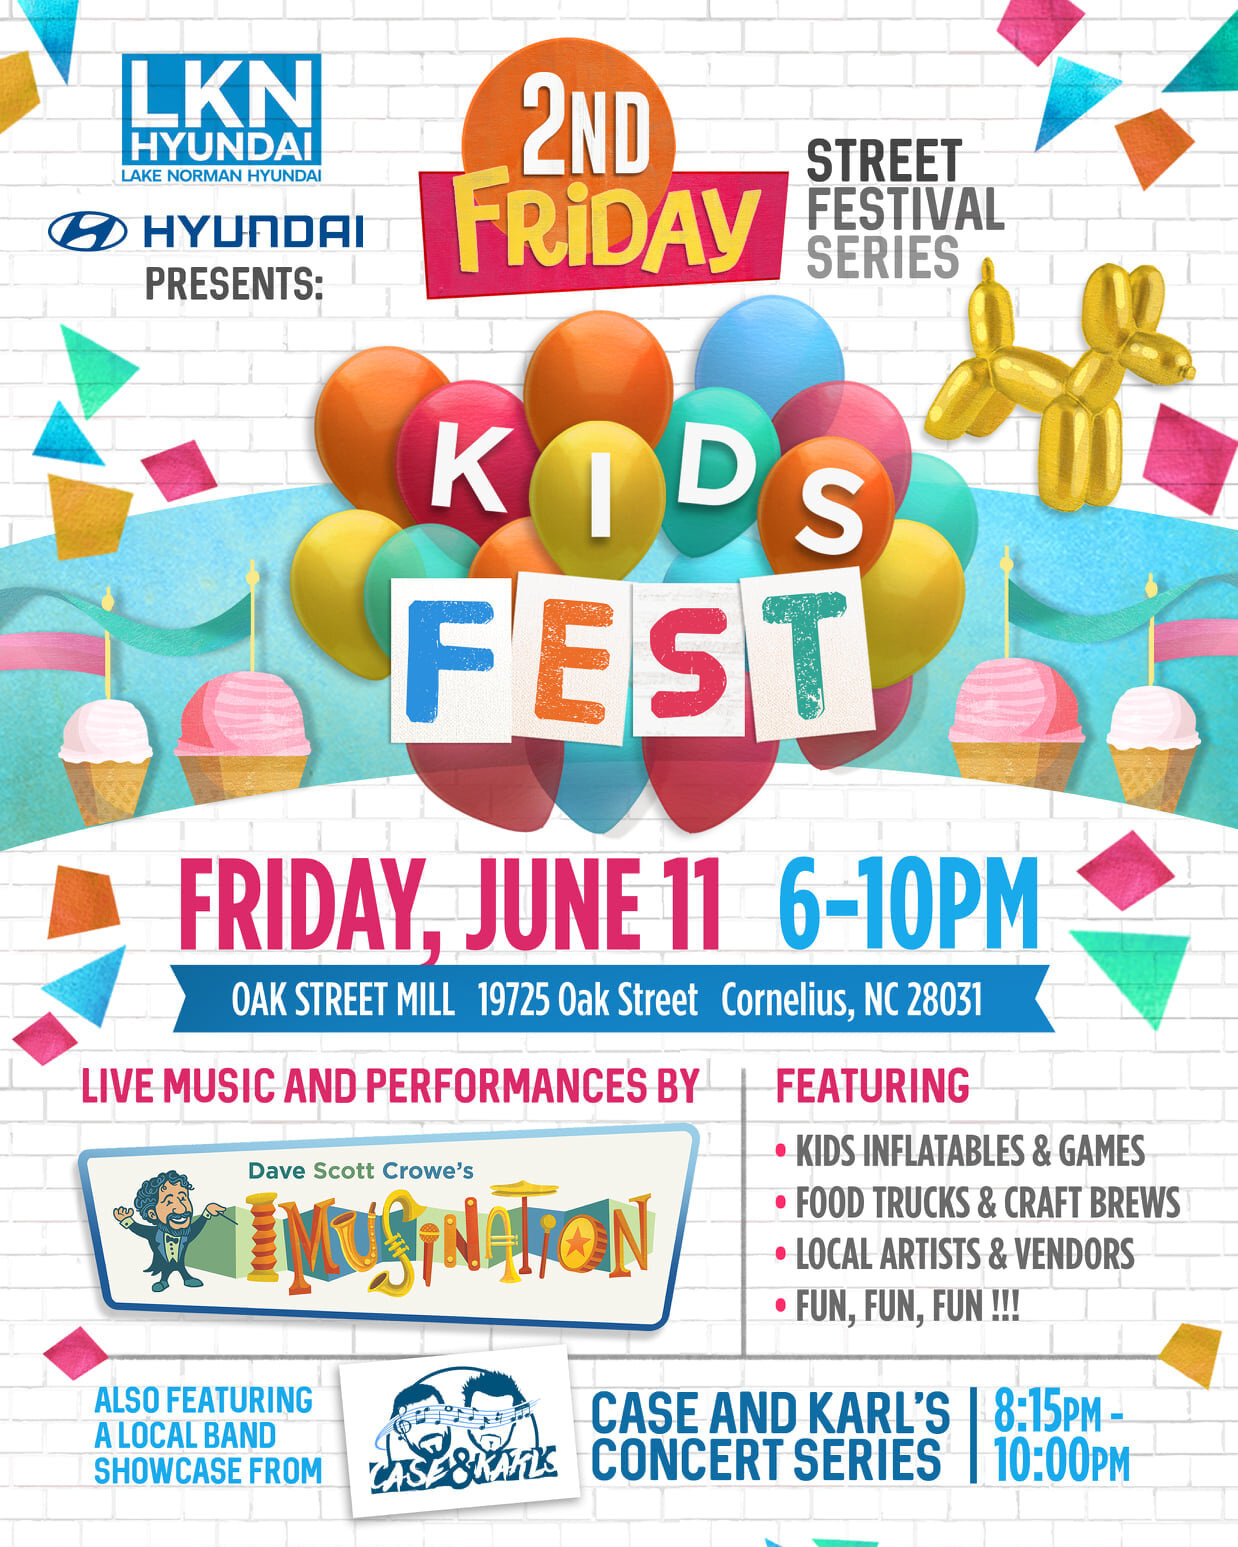 It's summertime and the 2021 2nd Friday Street Festival Series is in full swing! 🌞 Who's ready for this month's exciting theme... 2nd Friday-Kids Fest!!🤸🤸 @oldtowncornelius #oldtowncornelius #2ndfridayfestival #familyfun #foodtrucks #summertime #m